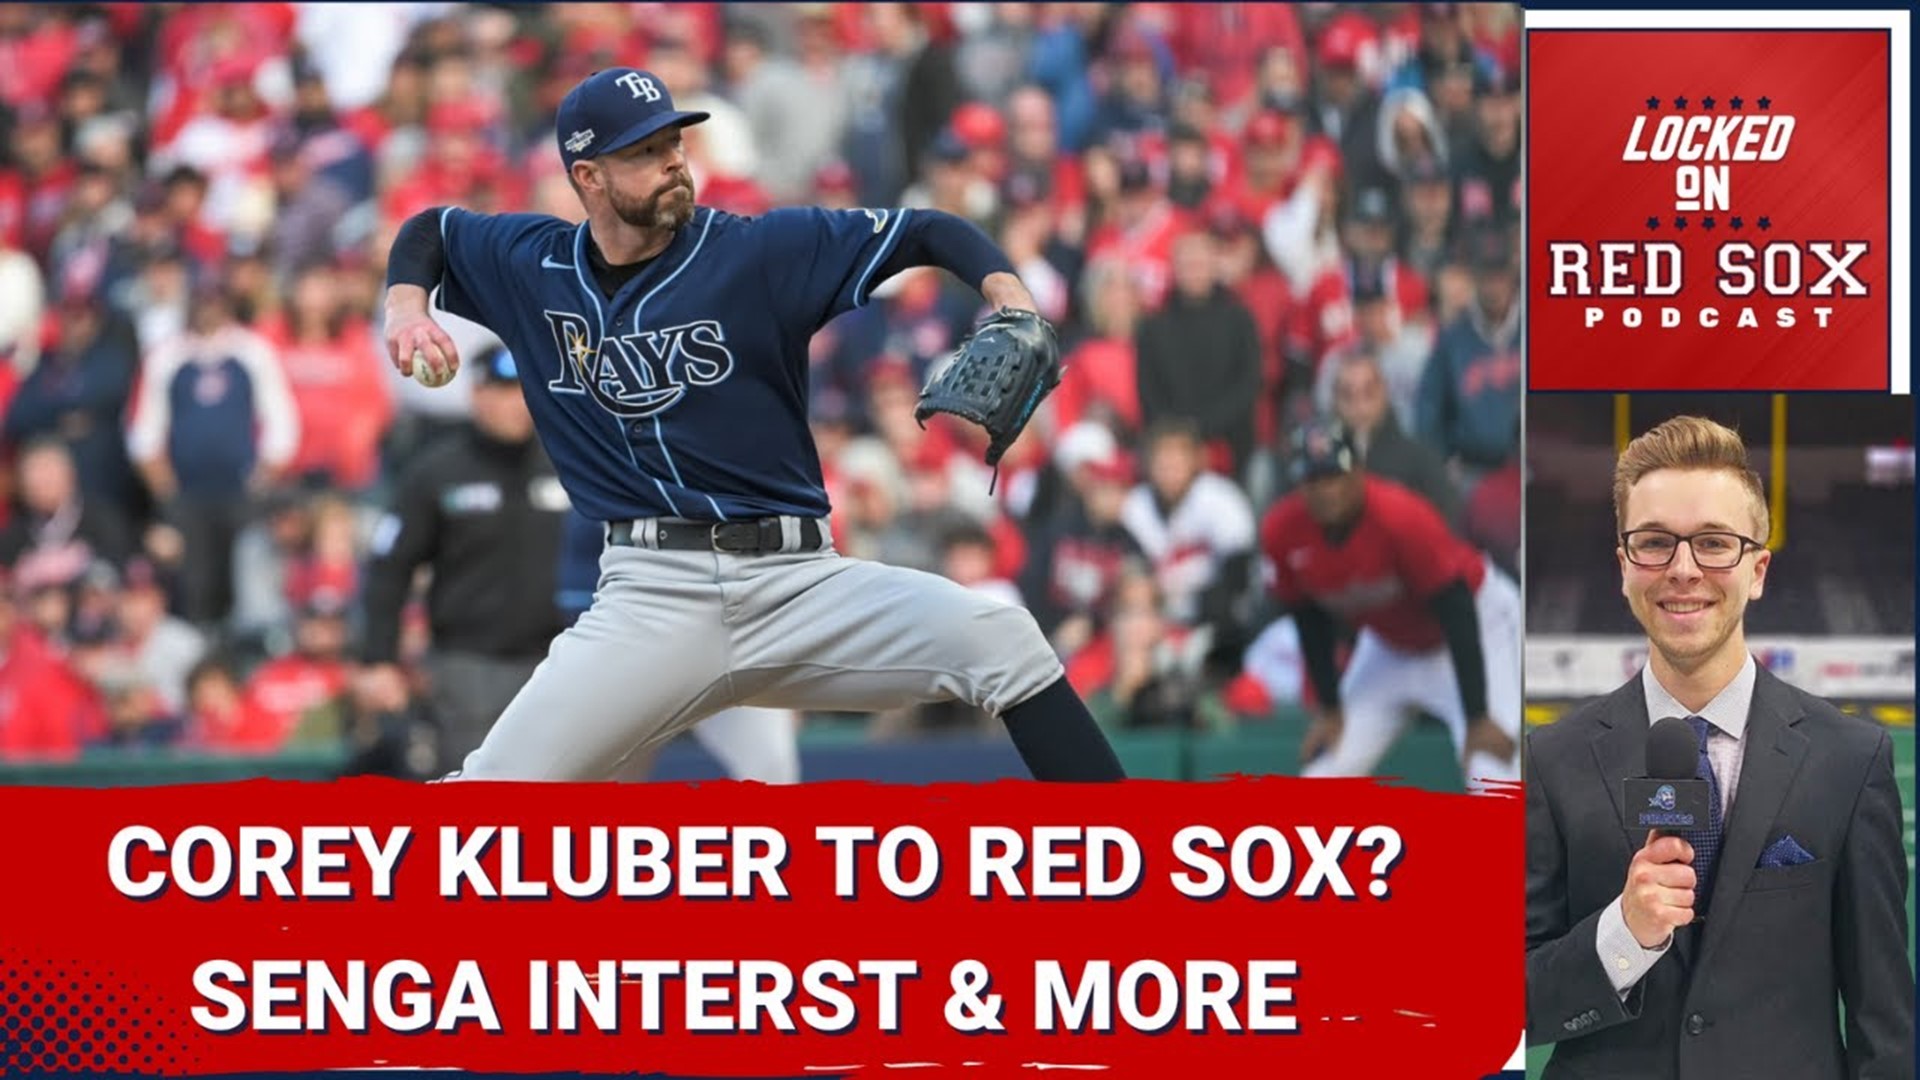 The team has expressed interest in Corey Kluber for the third offseason in a row and the highly touted Japanese pitching star Kodai Senga.